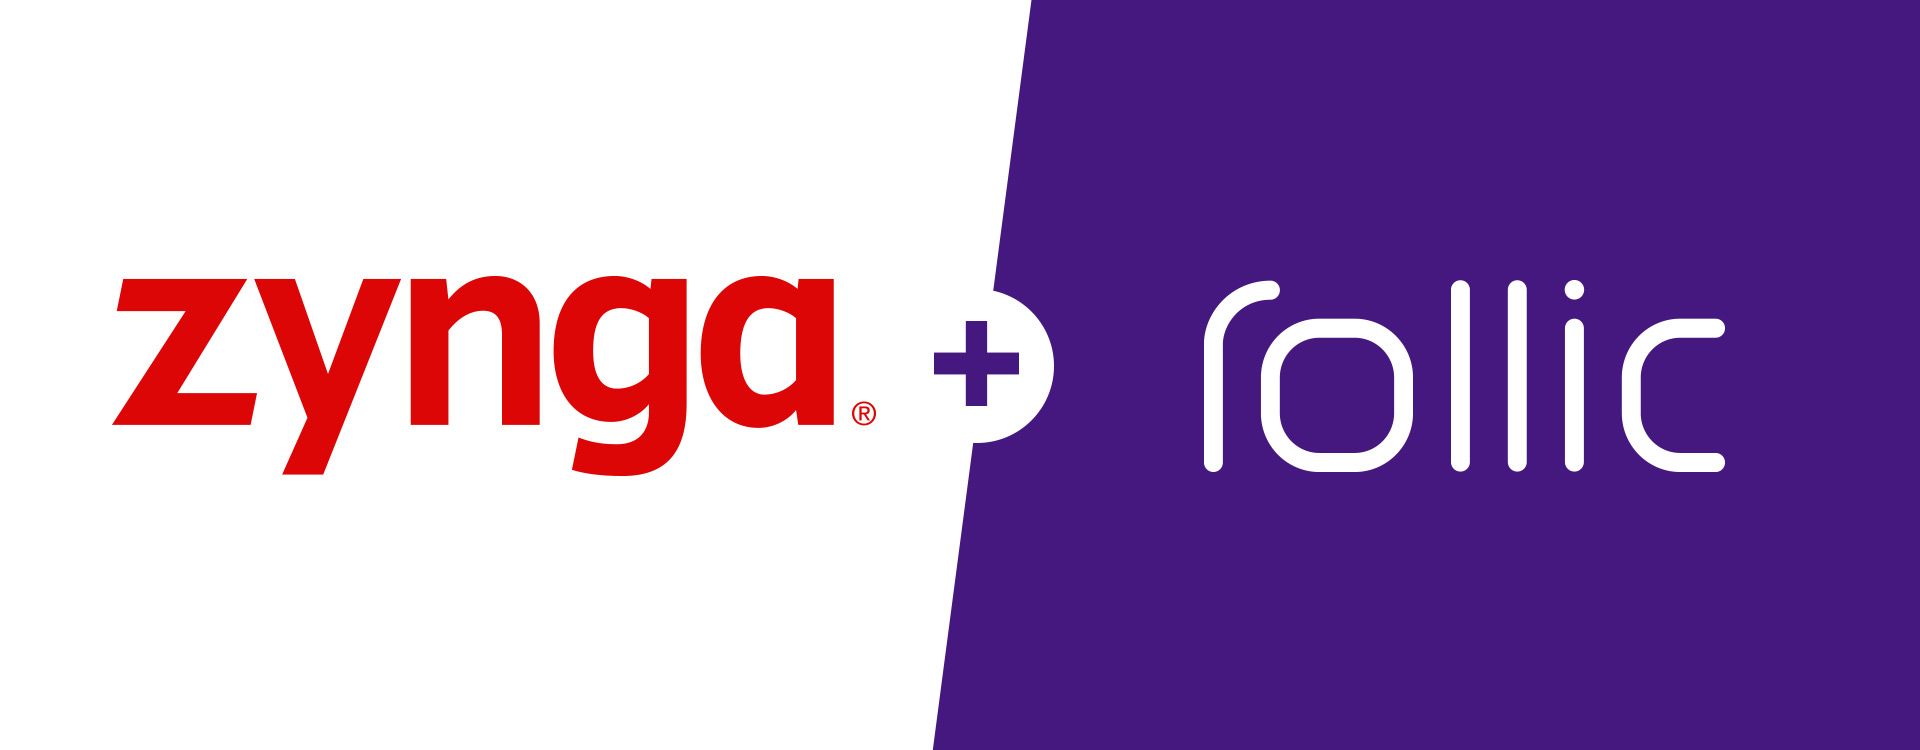 Zynga Enters Into Agreement to Acquire Istanbul-based Rollic, One of the Fastest Growing Hyper-Casual Mobile Game Companies image